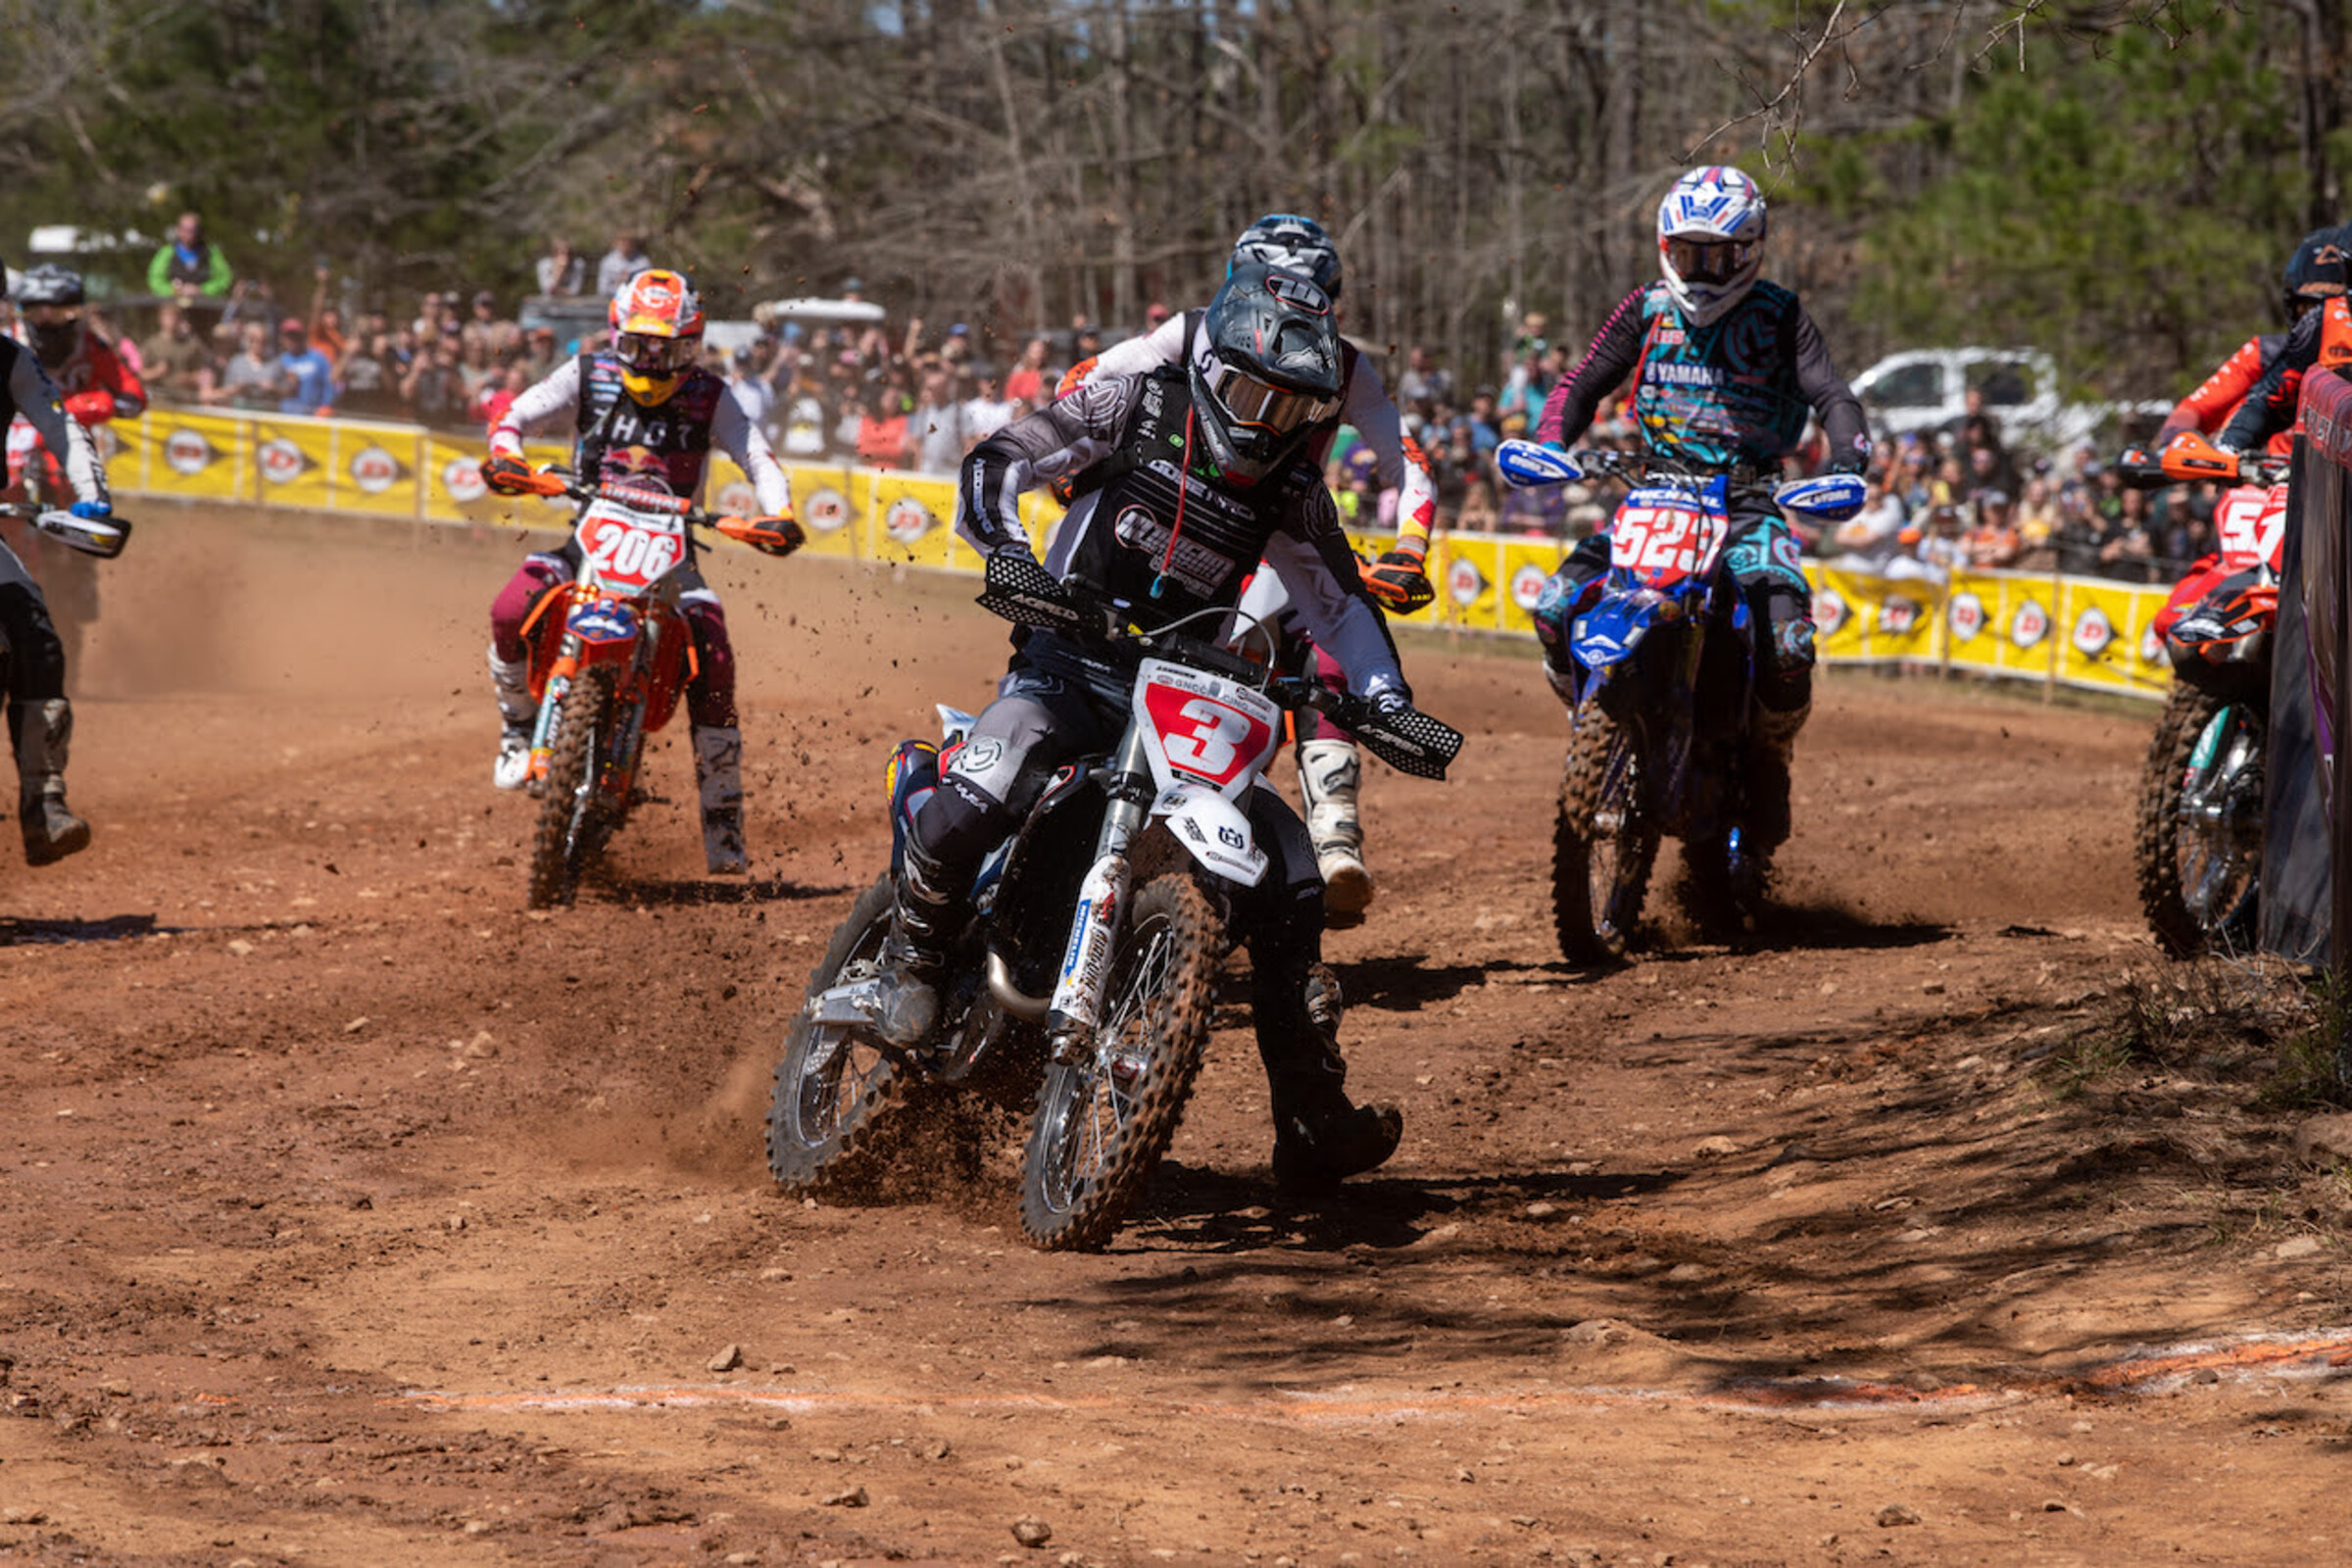 AMA Supermoto National Championship scheduled for Nov. 7-8 - American  Motorcyclist Association